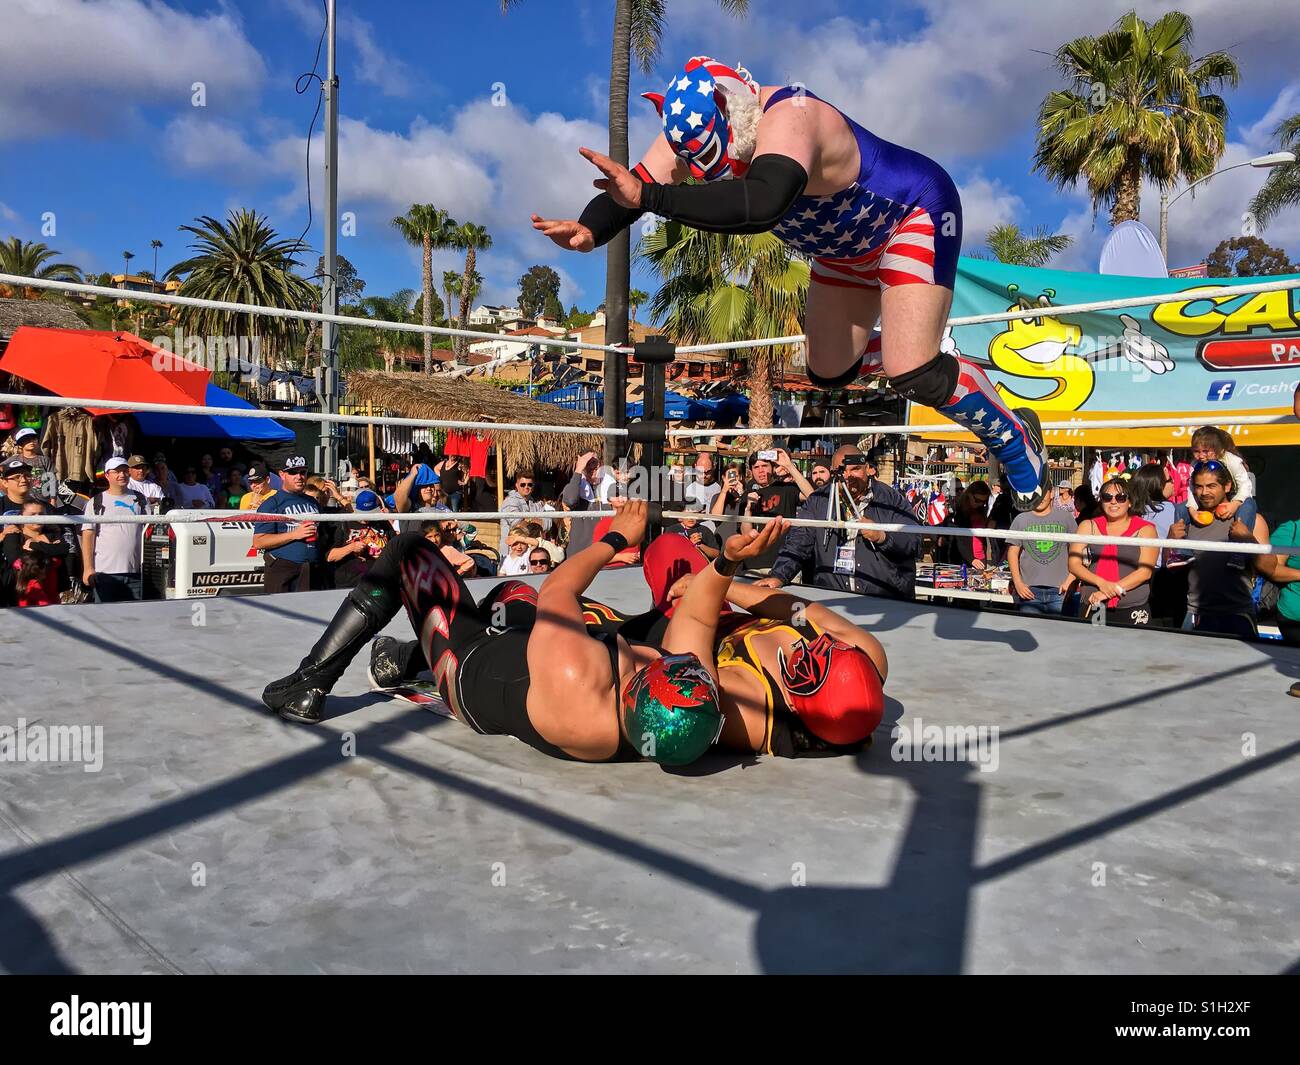 Lucha Libre Mexican Wrestling match with wrestler performing a body drop. Lucha Libre is Spanish for free fight and is a term used in Mexico for a form of professional wrestling. Taken 6 May 2016. Stock Photo